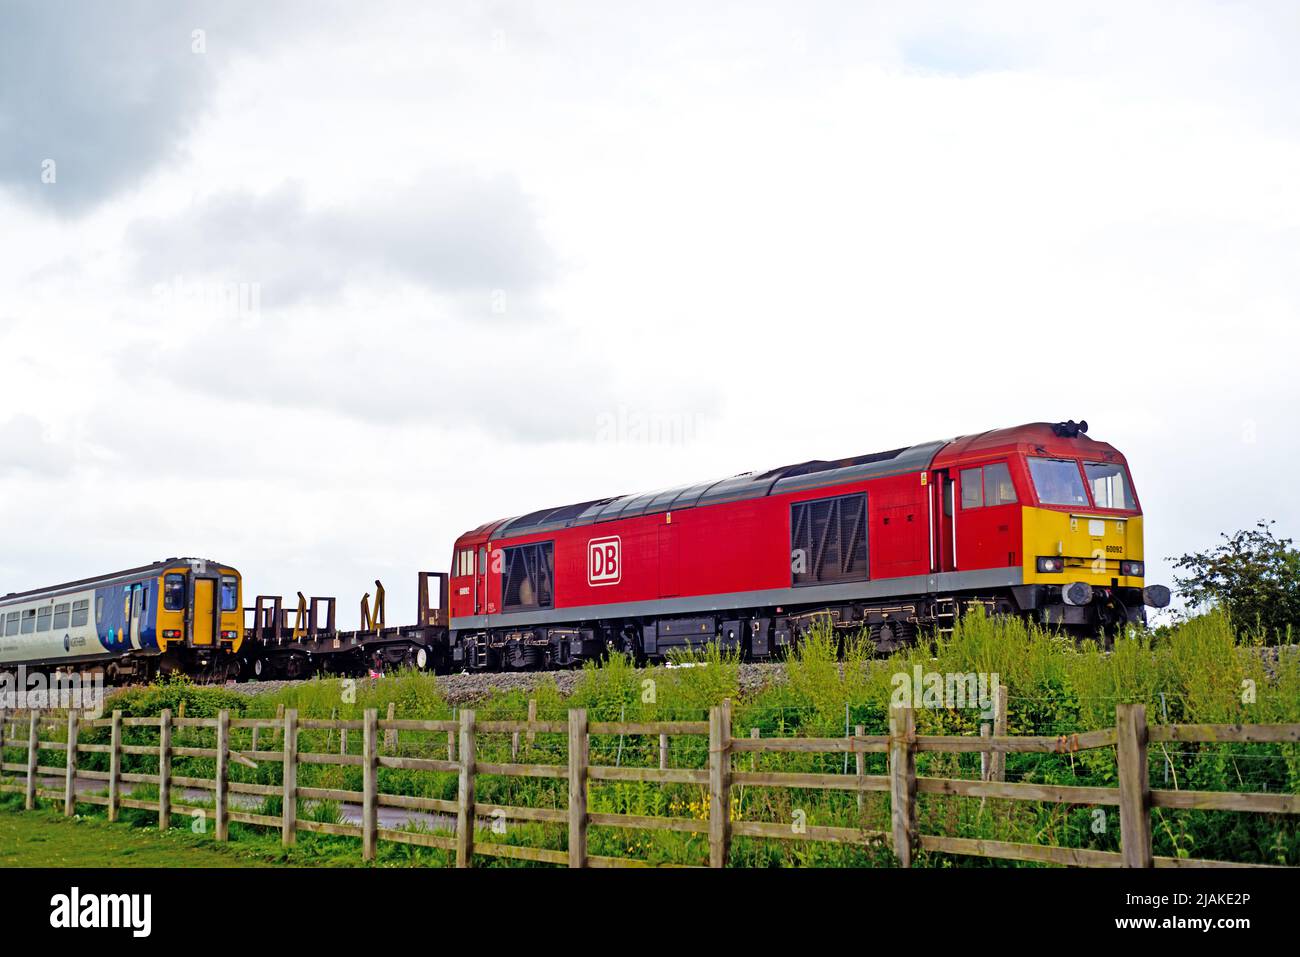 Northern Train passing DB Shenker class 60 on a freight from Skinningrove, Moorhouses, Stockton on Tees, Cleveland, England Stock Photo